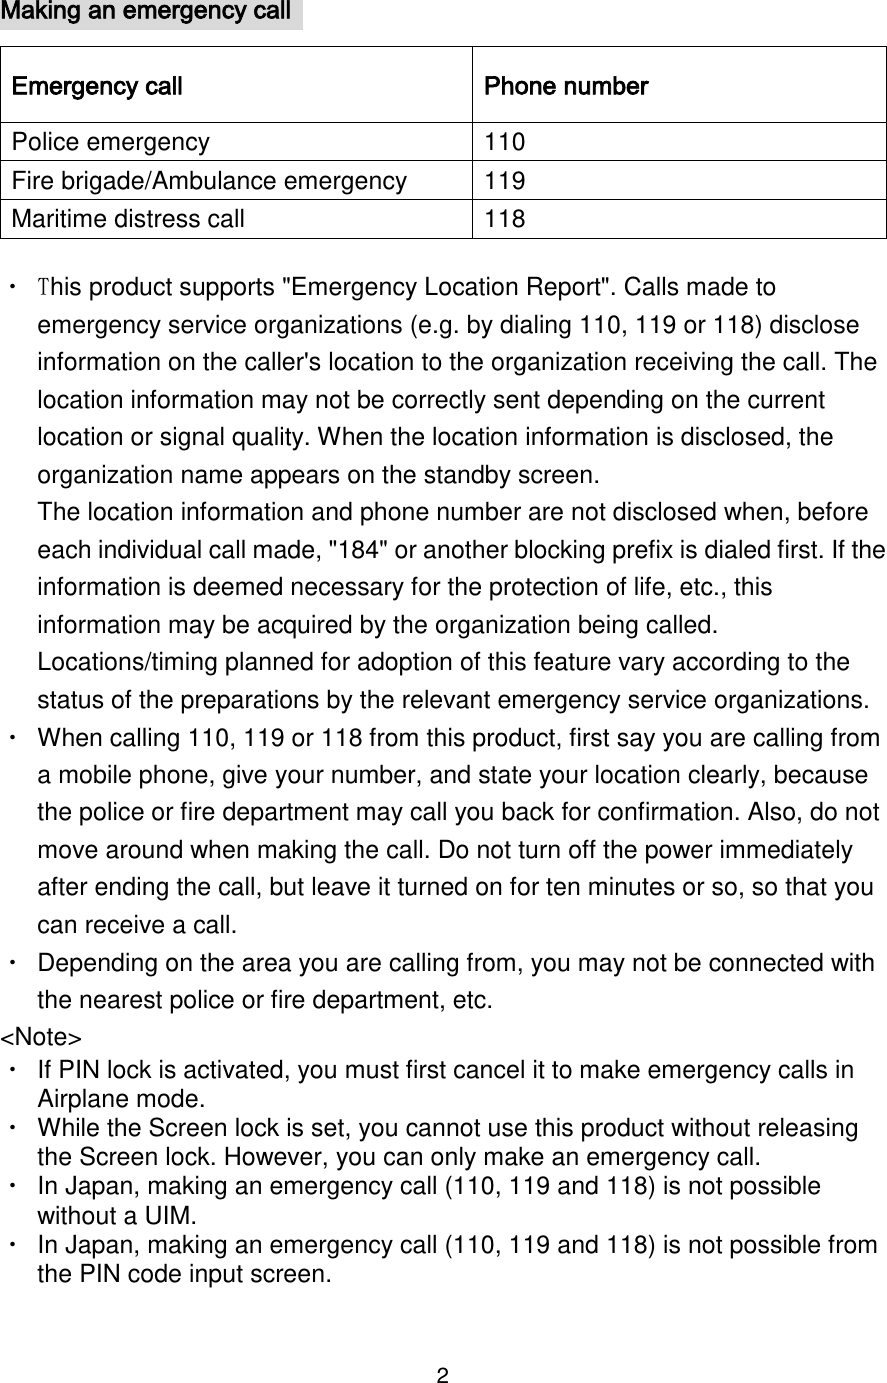 2  Making an emergency call   Emergency call Phone number Police emergency 110 Fire brigade/Ambulance emergency 119 Maritime distress call 118 ・ This product supports &quot;Emergency Location Report&quot;. Calls made to emergency service organizations (e.g. by dialing 110, 119 or 118) disclose information on the caller&apos;s location to the organization receiving the call. The location information may not be correctly sent depending on the current location or signal quality. When the location information is disclosed, the organization name appears on the standby screen. The location information and phone number are not disclosed when, before each individual call made, &quot;184&quot; or another blocking prefix is dialed first. If the information is deemed necessary for the protection of life, etc., this information may be acquired by the organization being called. Locations/timing planned for adoption of this feature vary according to the status of the preparations by the relevant emergency service organizations. ・ When calling 110, 119 or 118 from this product, first say you are calling from a mobile phone, give your number, and state your location clearly, because the police or fire department may call you back for confirmation. Also, do not move around when making the call. Do not turn off the power immediately after ending the call, but leave it turned on for ten minutes or so, so that you can receive a call. ・ Depending on the area you are calling from, you may not be connected with the nearest police or fire department, etc. &lt;Note&gt; ・ If PIN lock is activated, you must first cancel it to make emergency calls in Airplane mode. ・ While the Screen lock is set, you cannot use this product without releasing the Screen lock. However, you can only make an emergency call. ・ In Japan, making an emergency call (110, 119 and 118) is not possible without a UIM. ・ In Japan, making an emergency call (110, 119 and 118) is not possible from the PIN code input screen. 